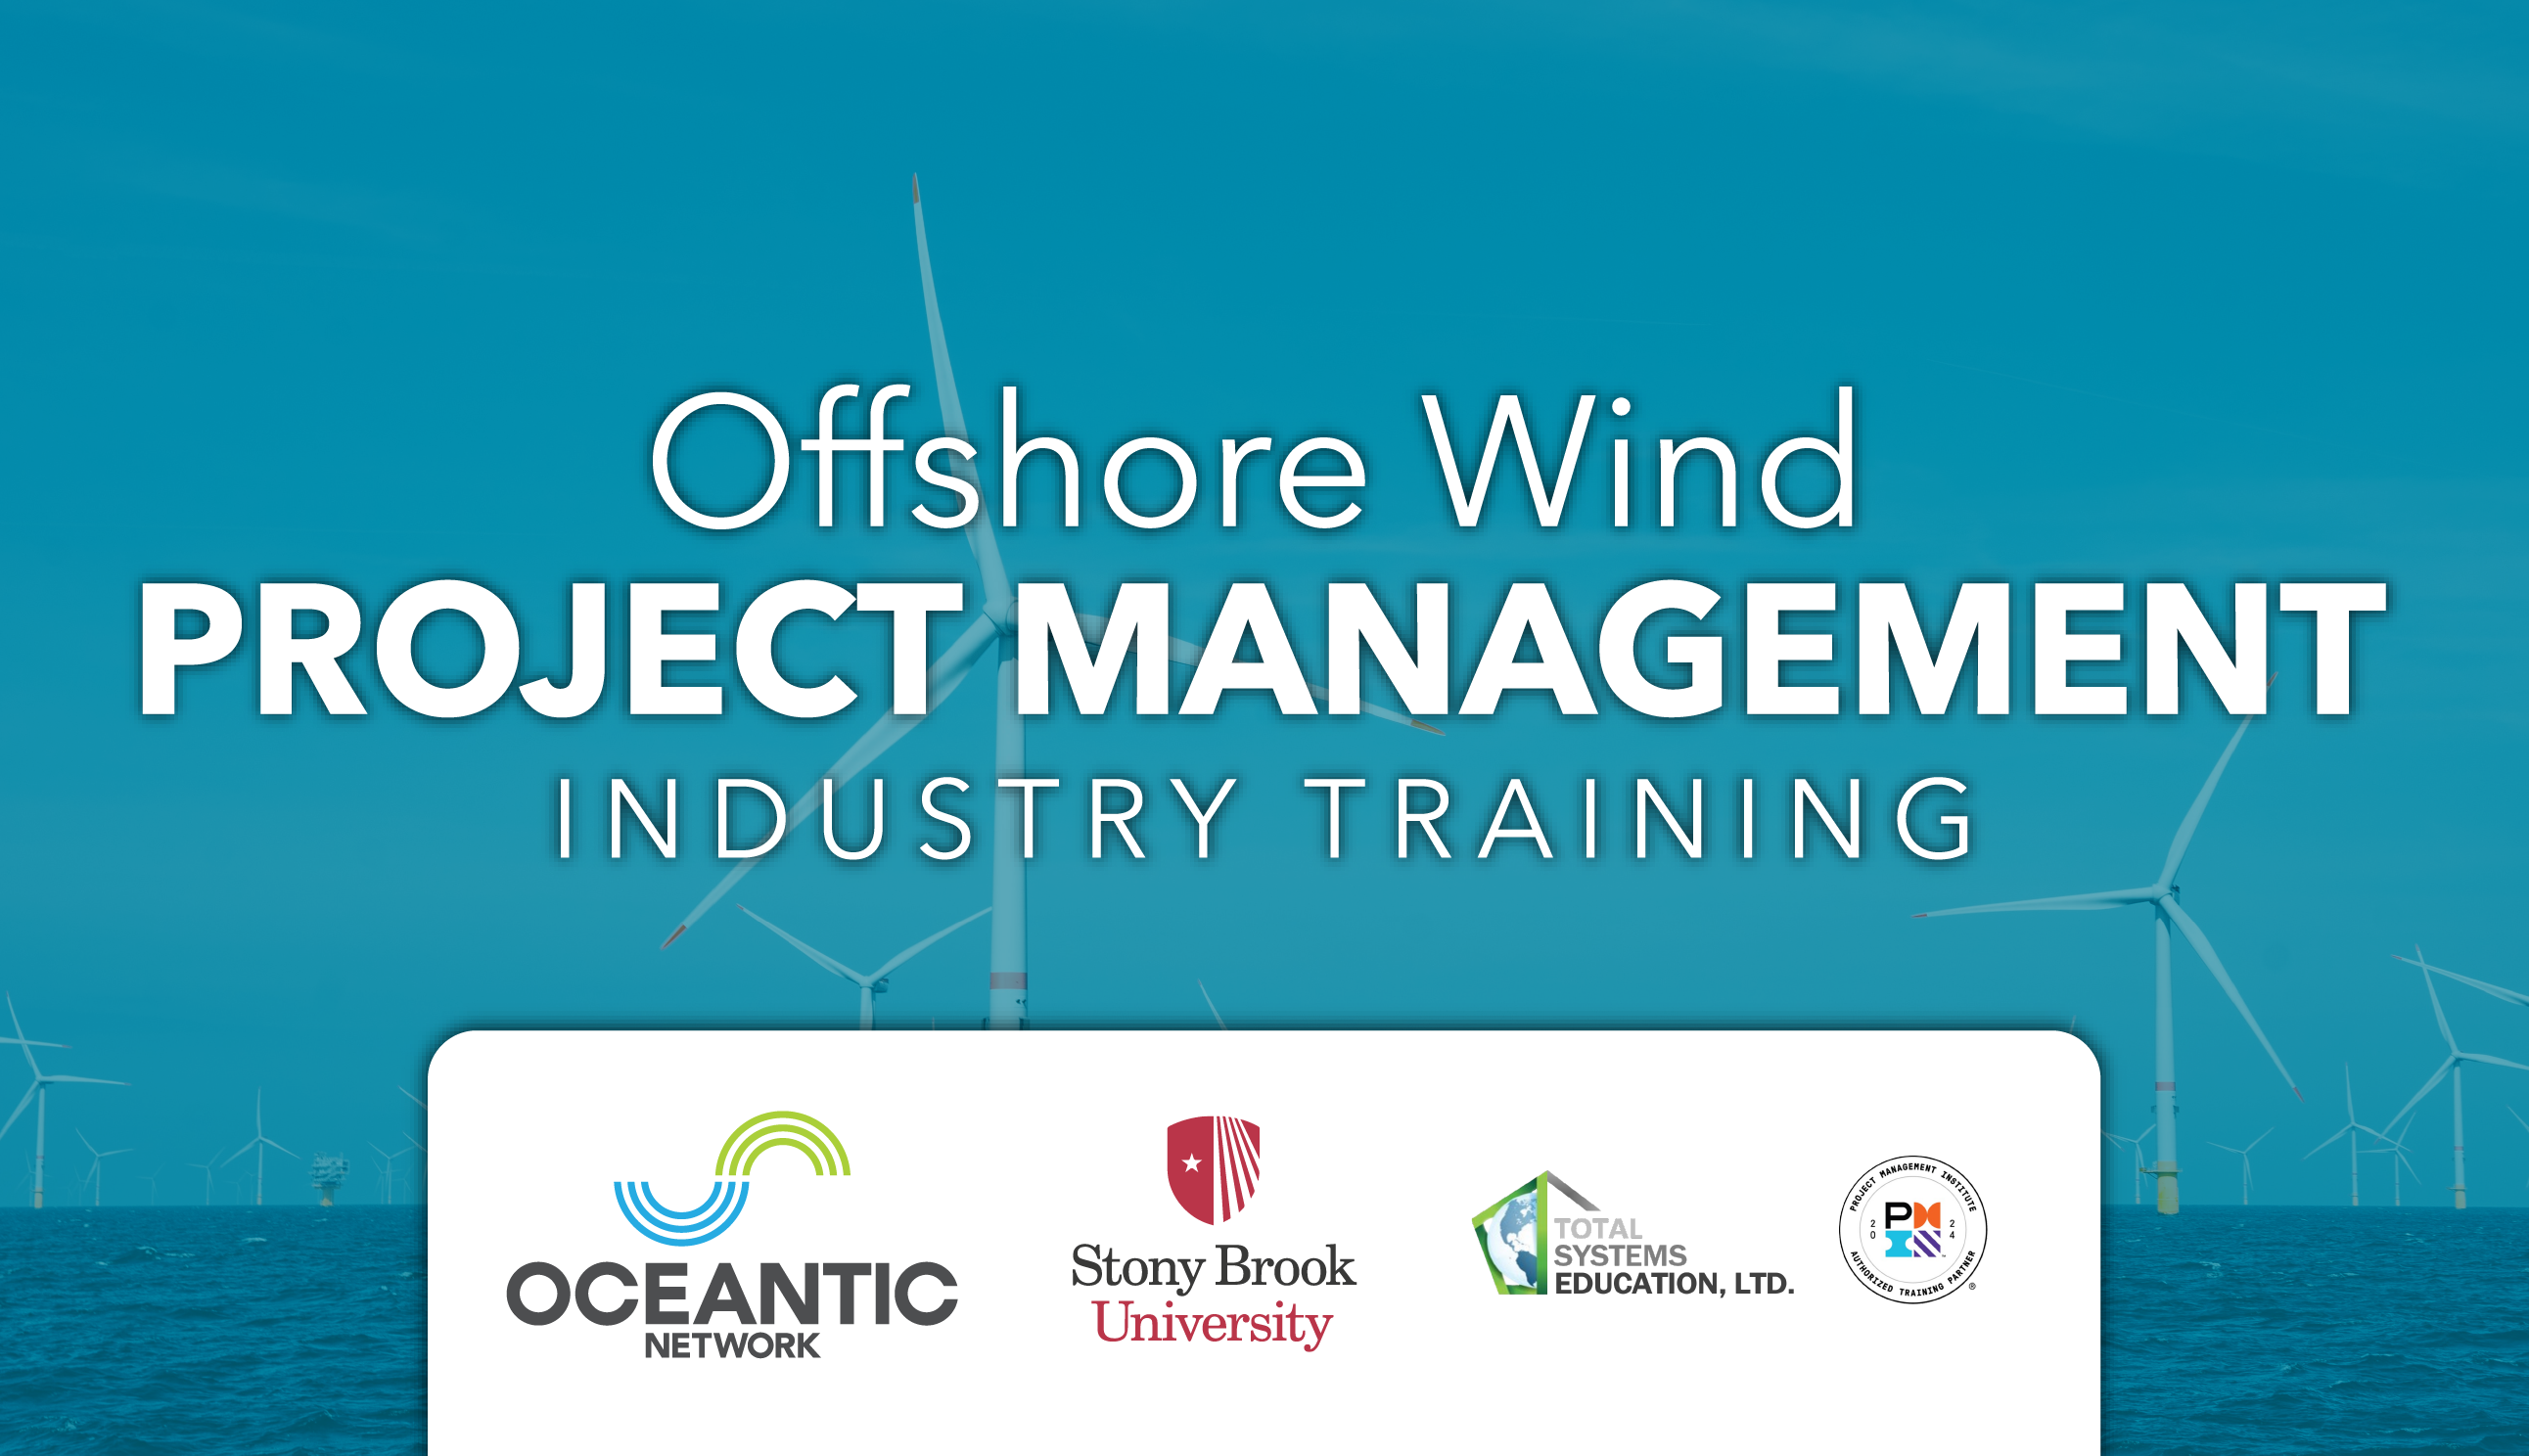 Offshore Wind Project Management Industry Training